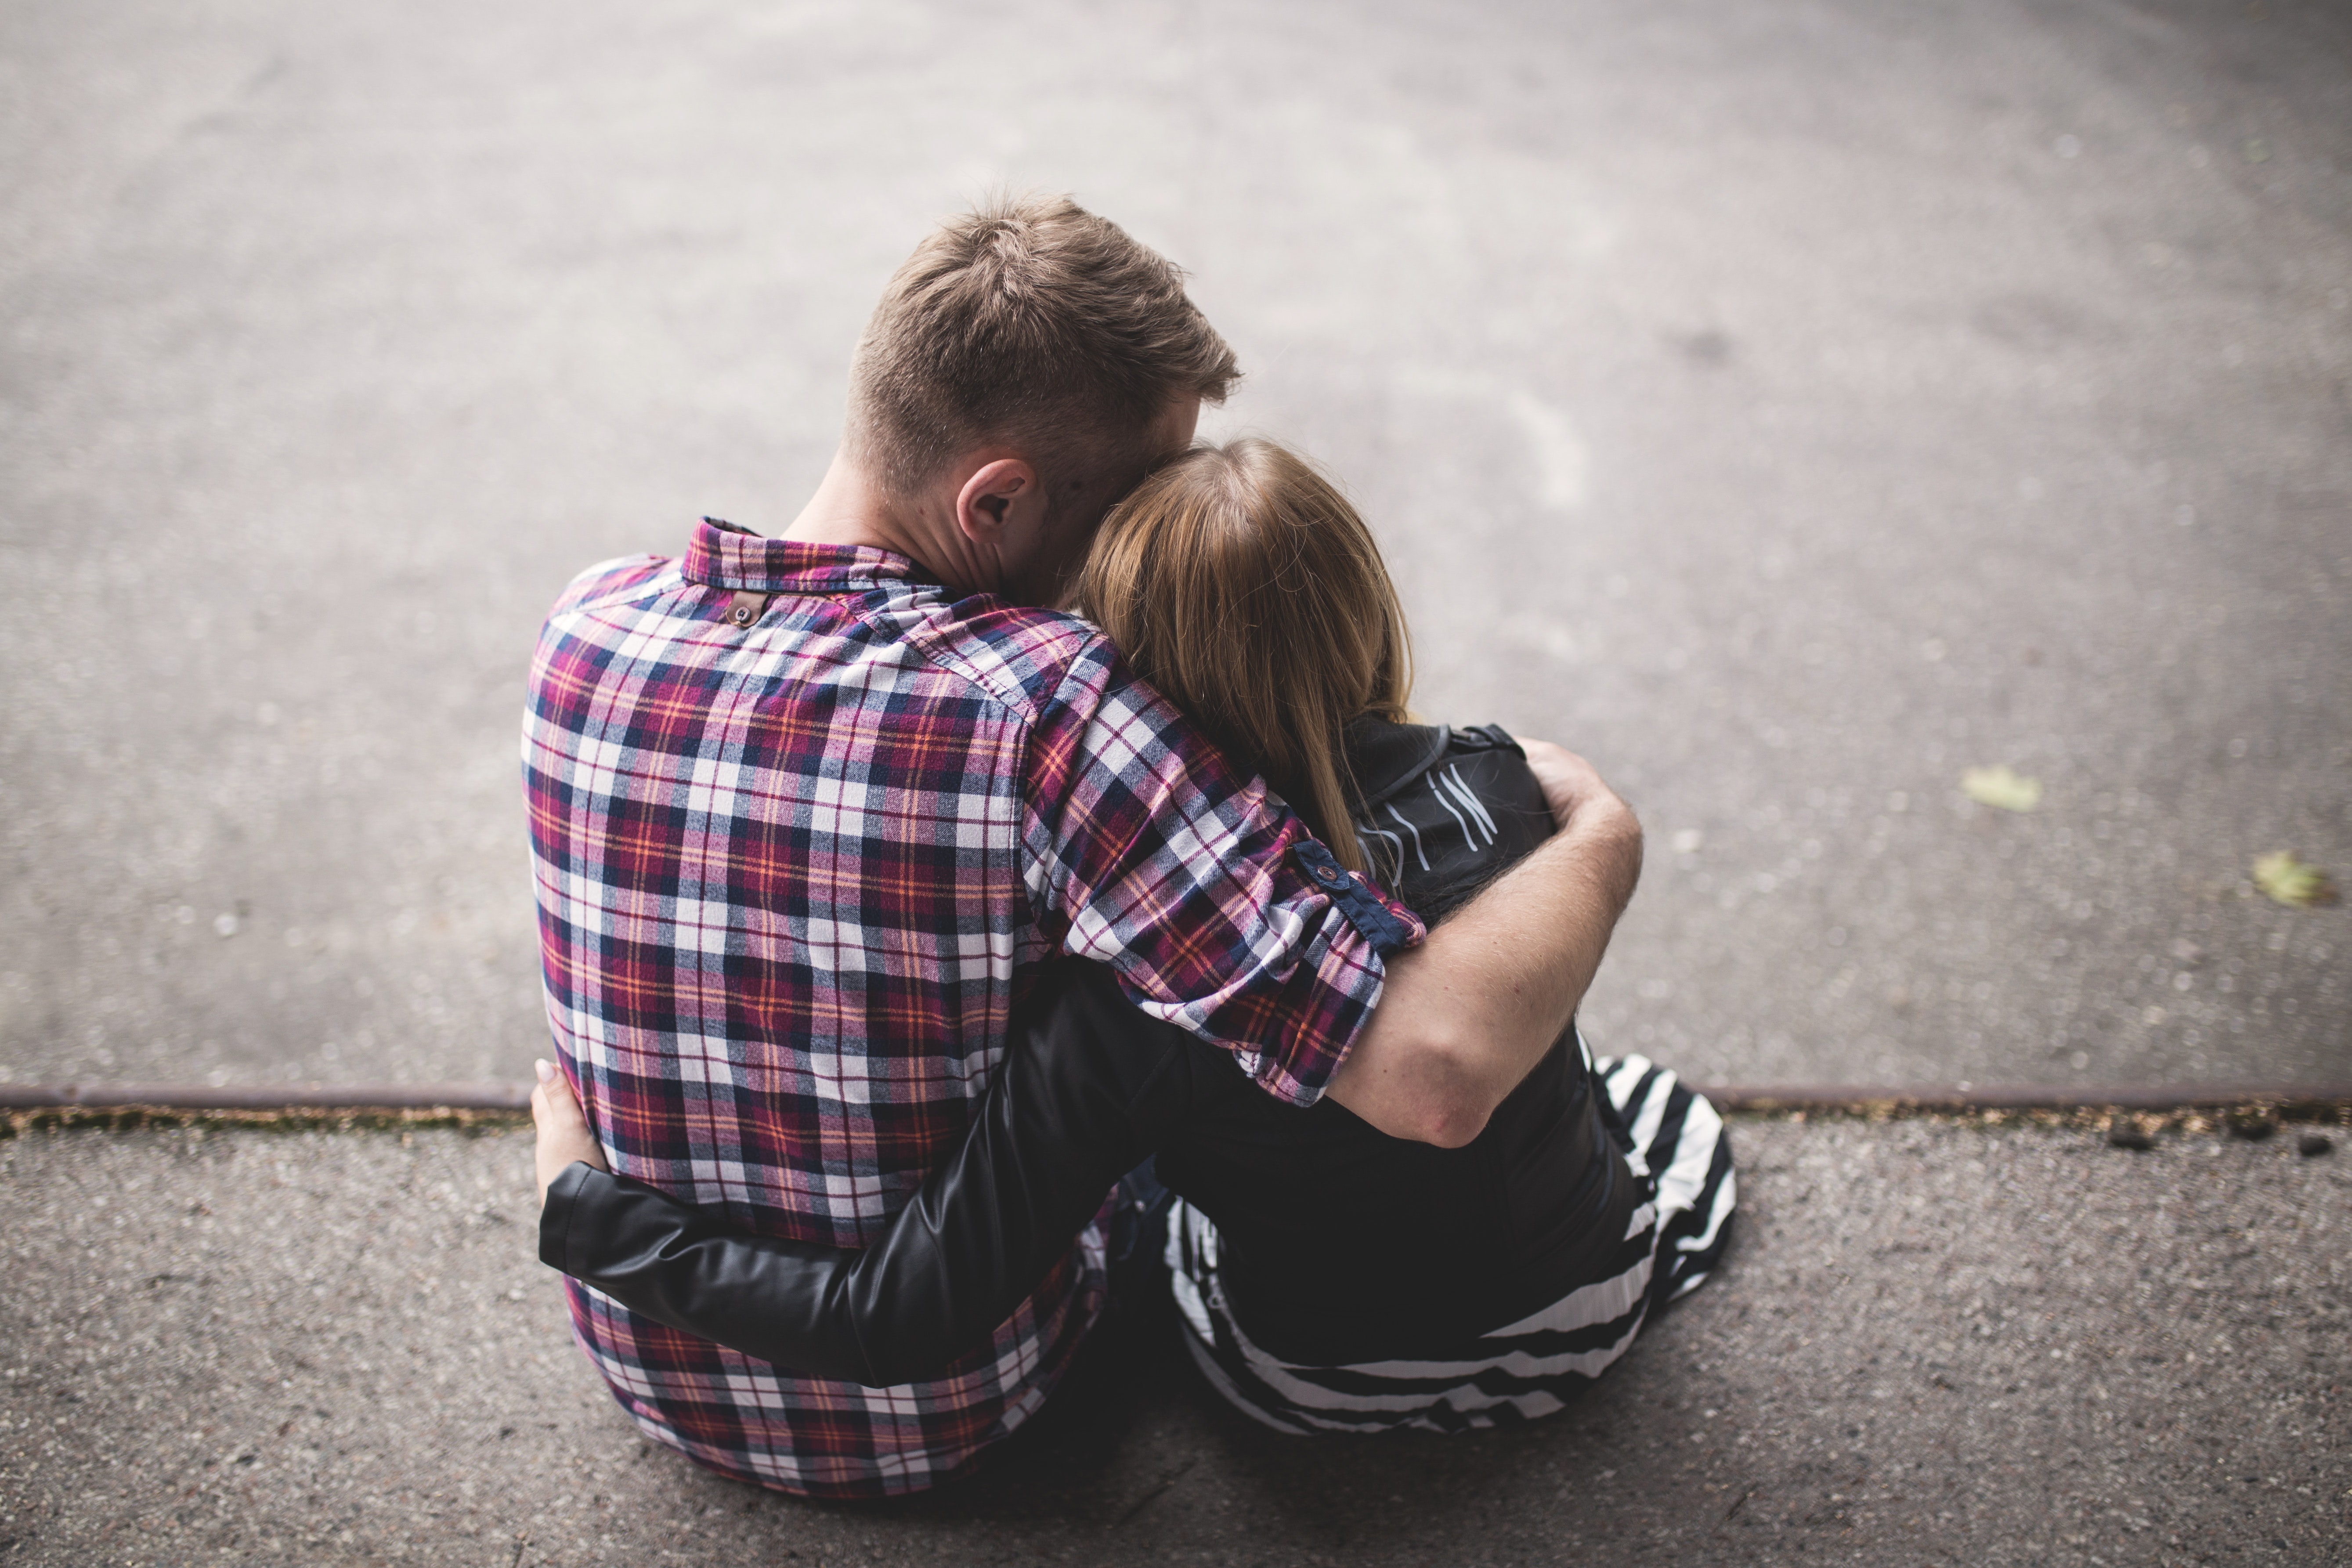 Man in red white and blue check long sleeve shirt beside woman in black and white stripes shirt hugging each other while sitting on a concrete surface photo